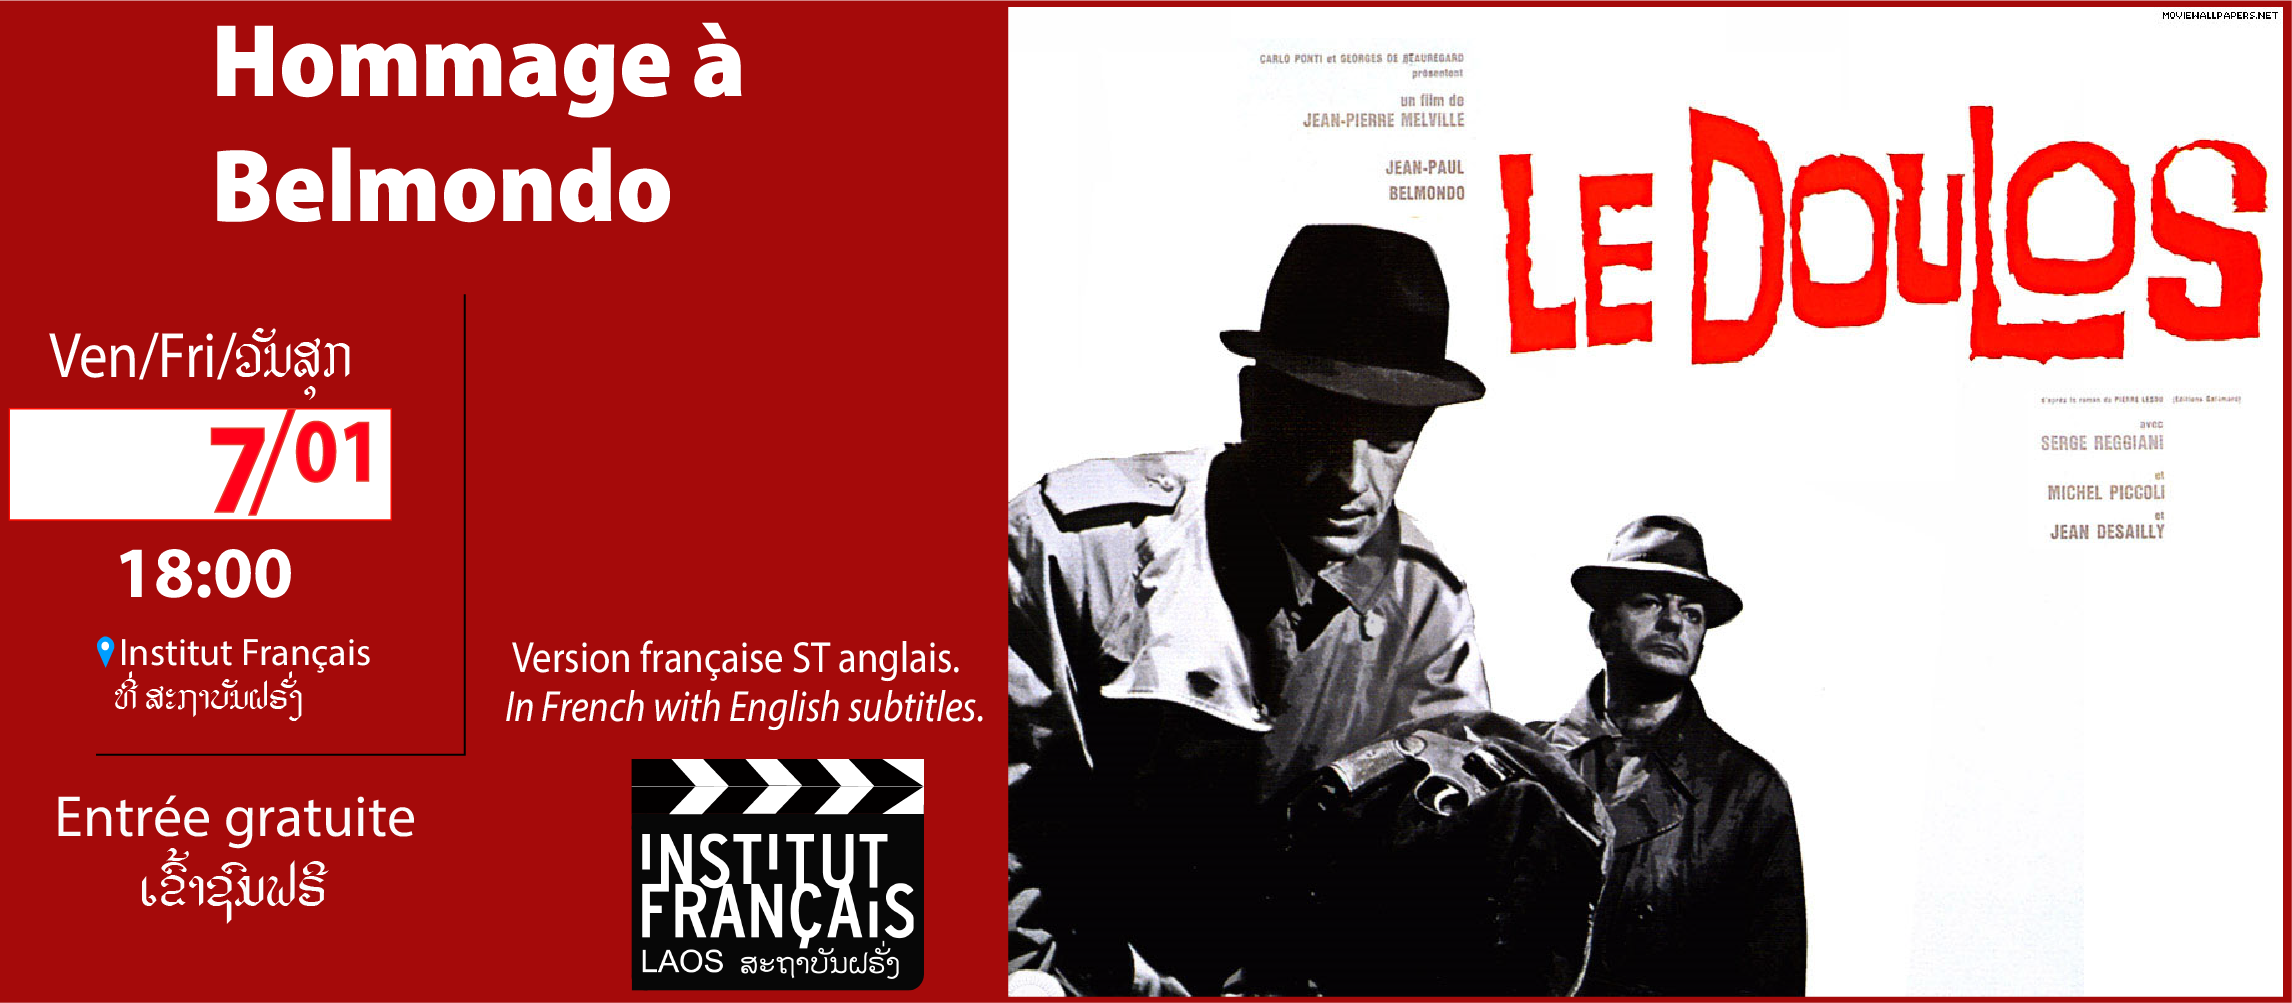 Film screening outdoors! HOMMAGE A BELMONDO "LE DOULOS"